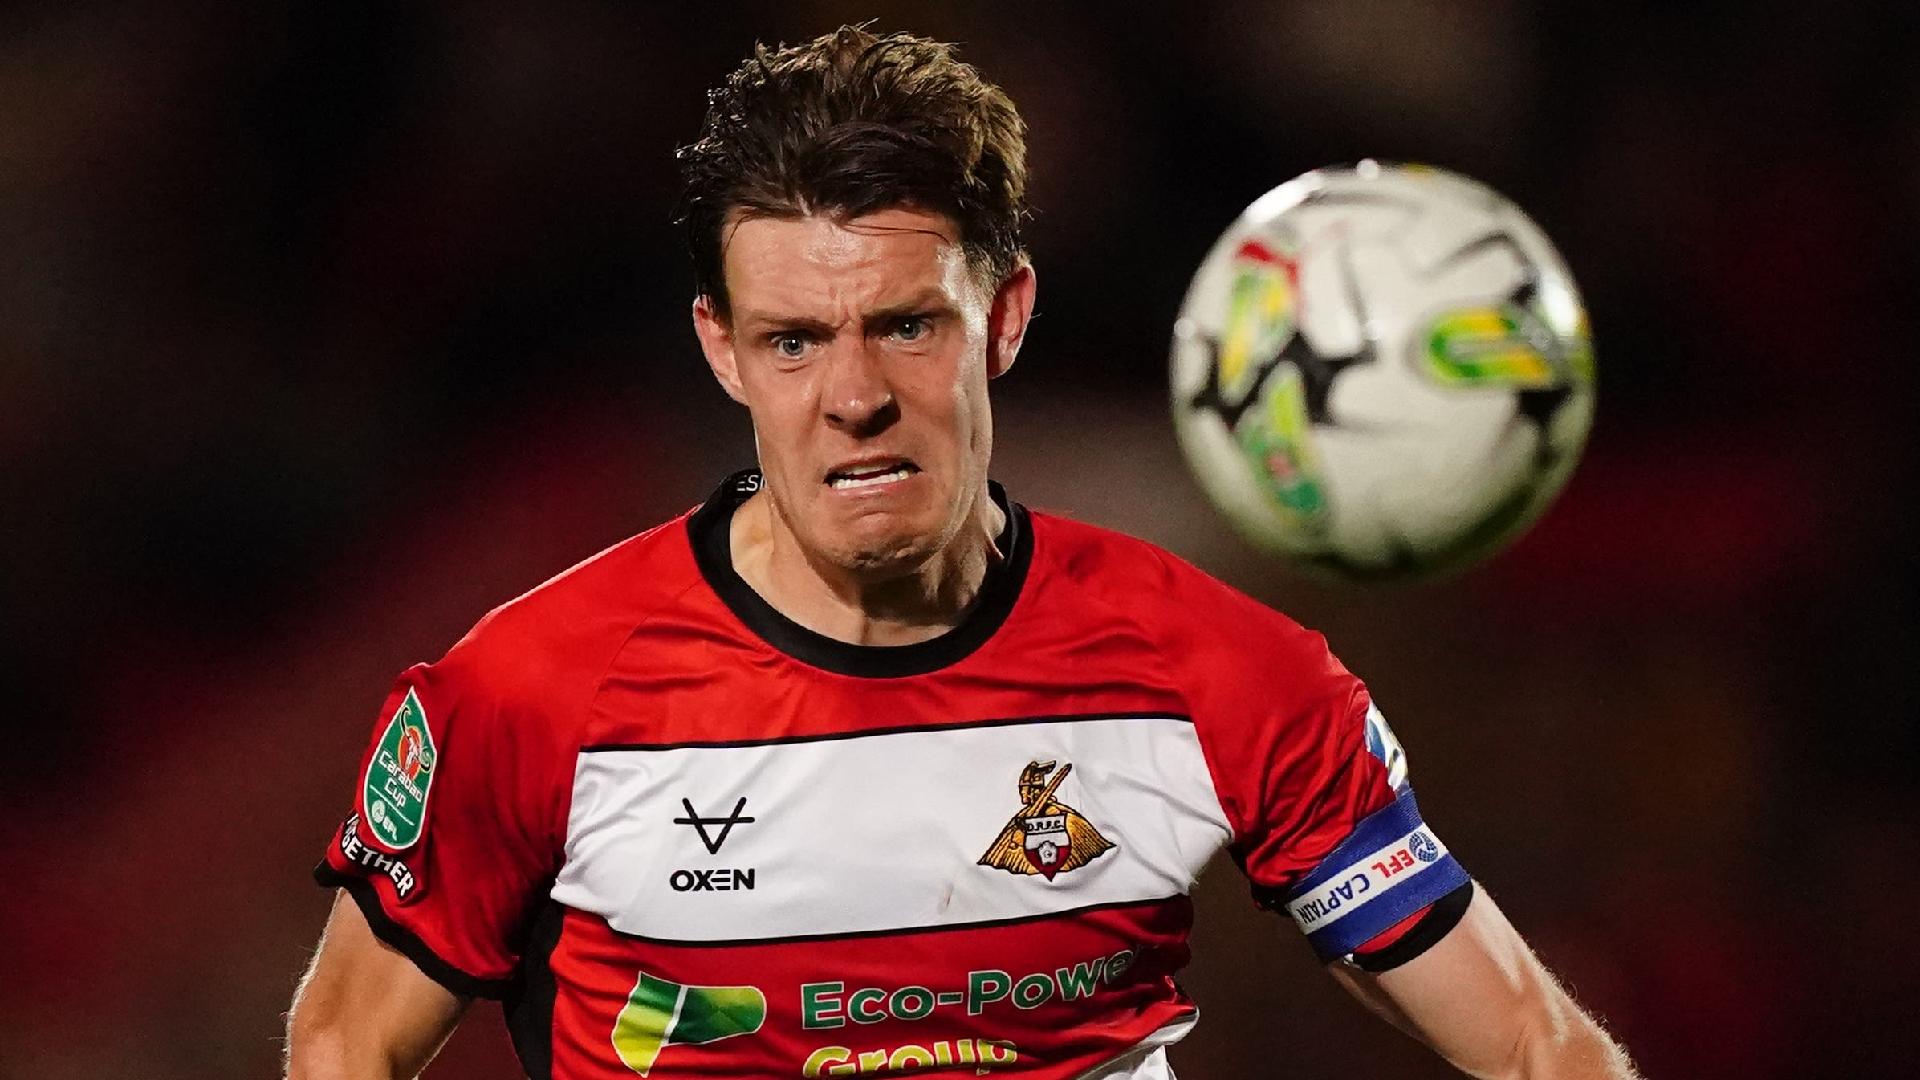 In-form Doncaster come from behind to beat play-off rivals Barrow